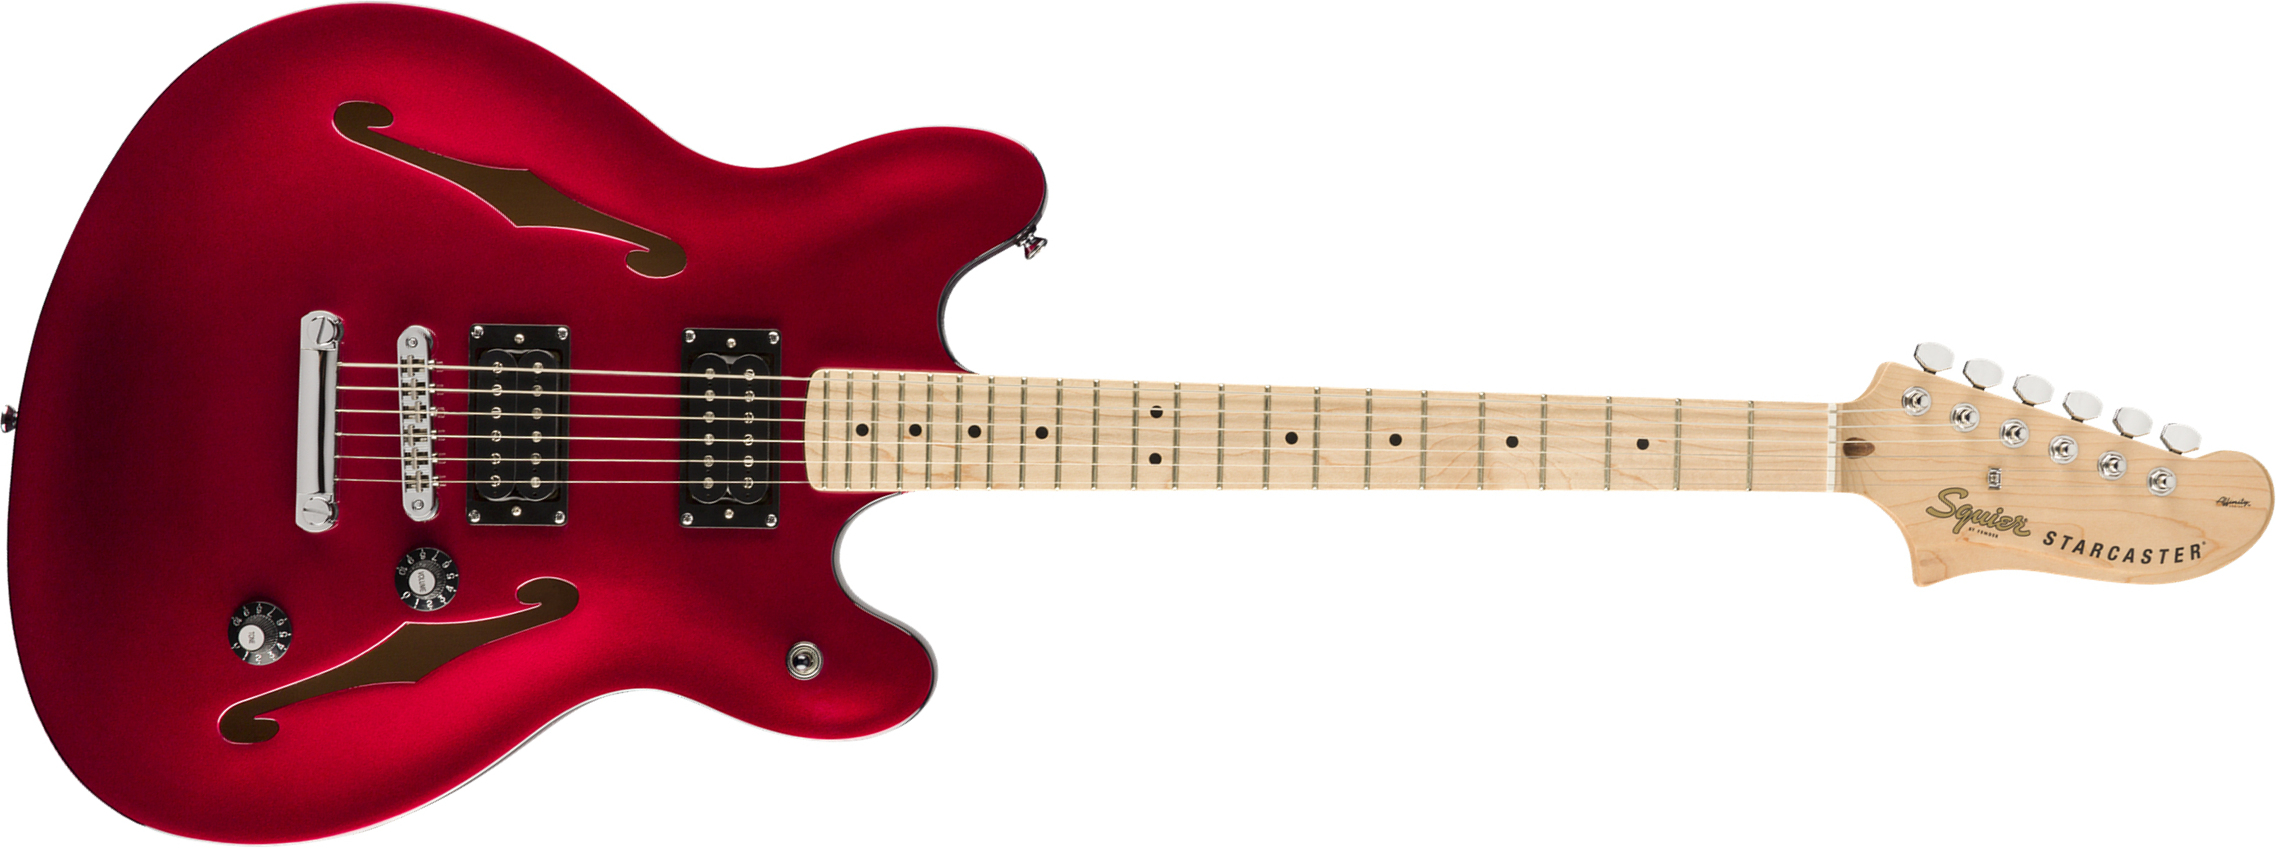 Squier Starcaster Affinity 2019 Hh Ht Mn - Candy Apple Red - Guitarra eléctrica semi caja - Main picture